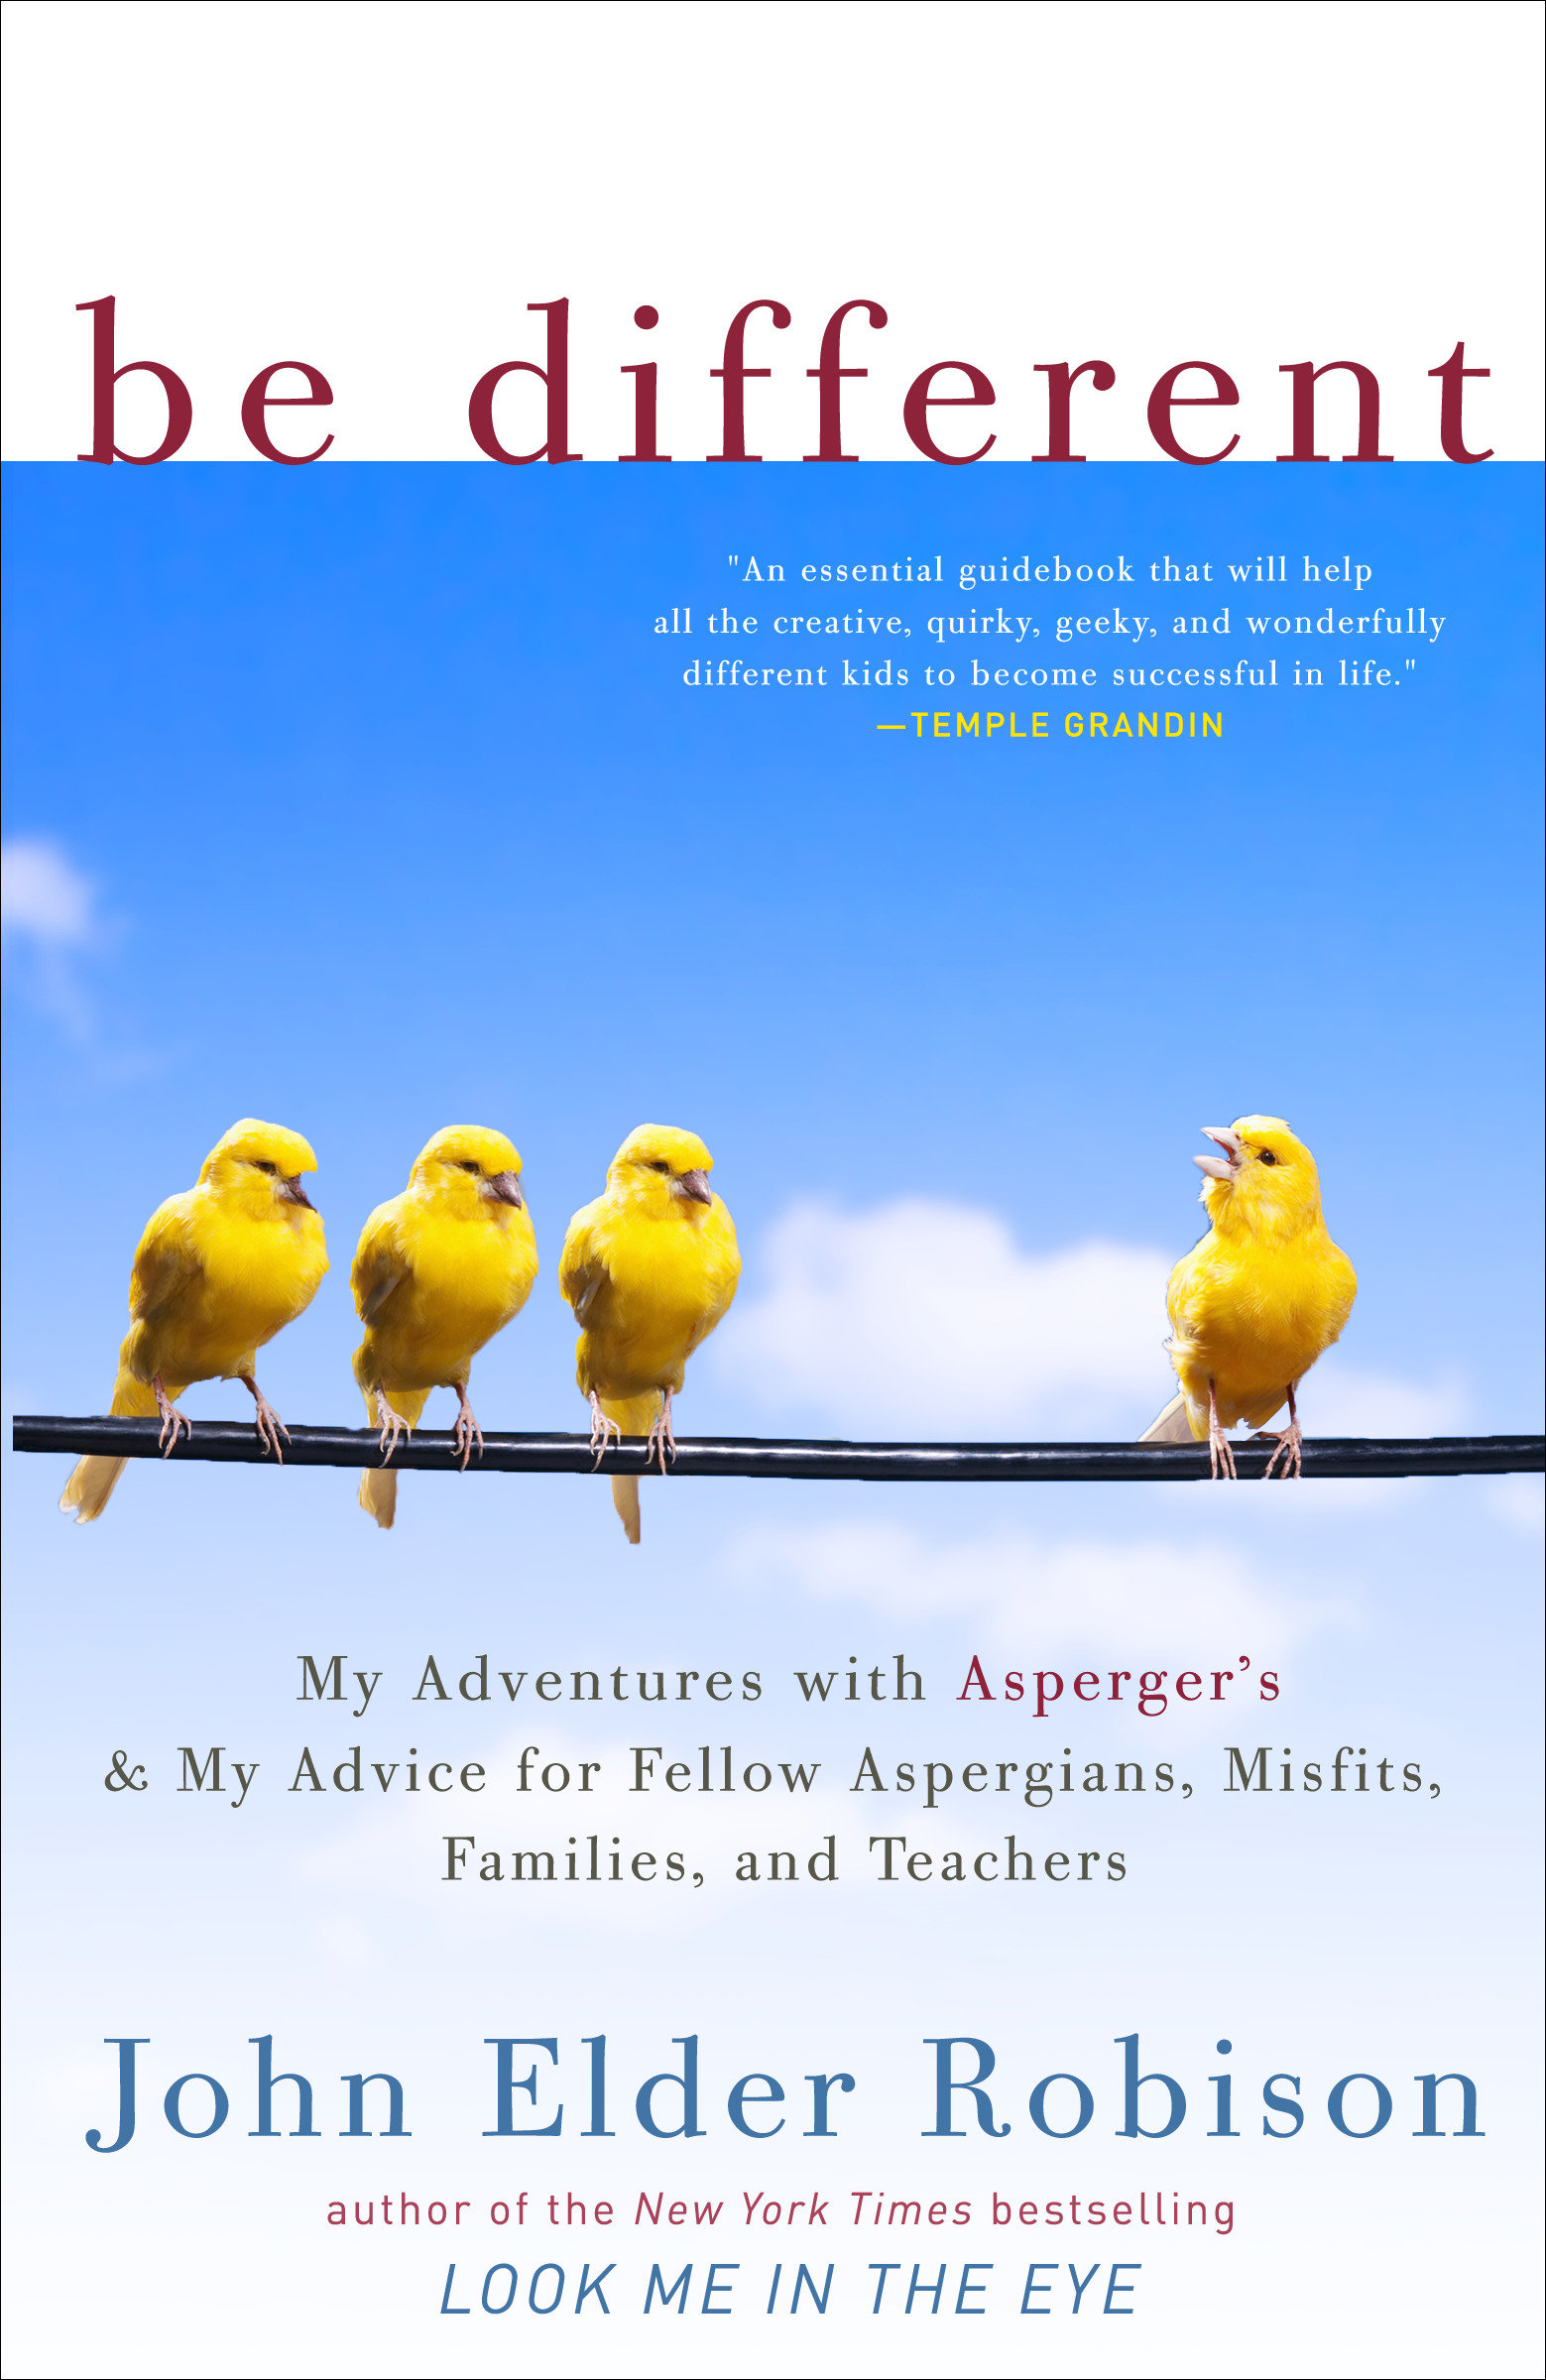 Be different adventures of a free-range aspergian : with practical advice for aspergians, misfits, families & teachers cover image